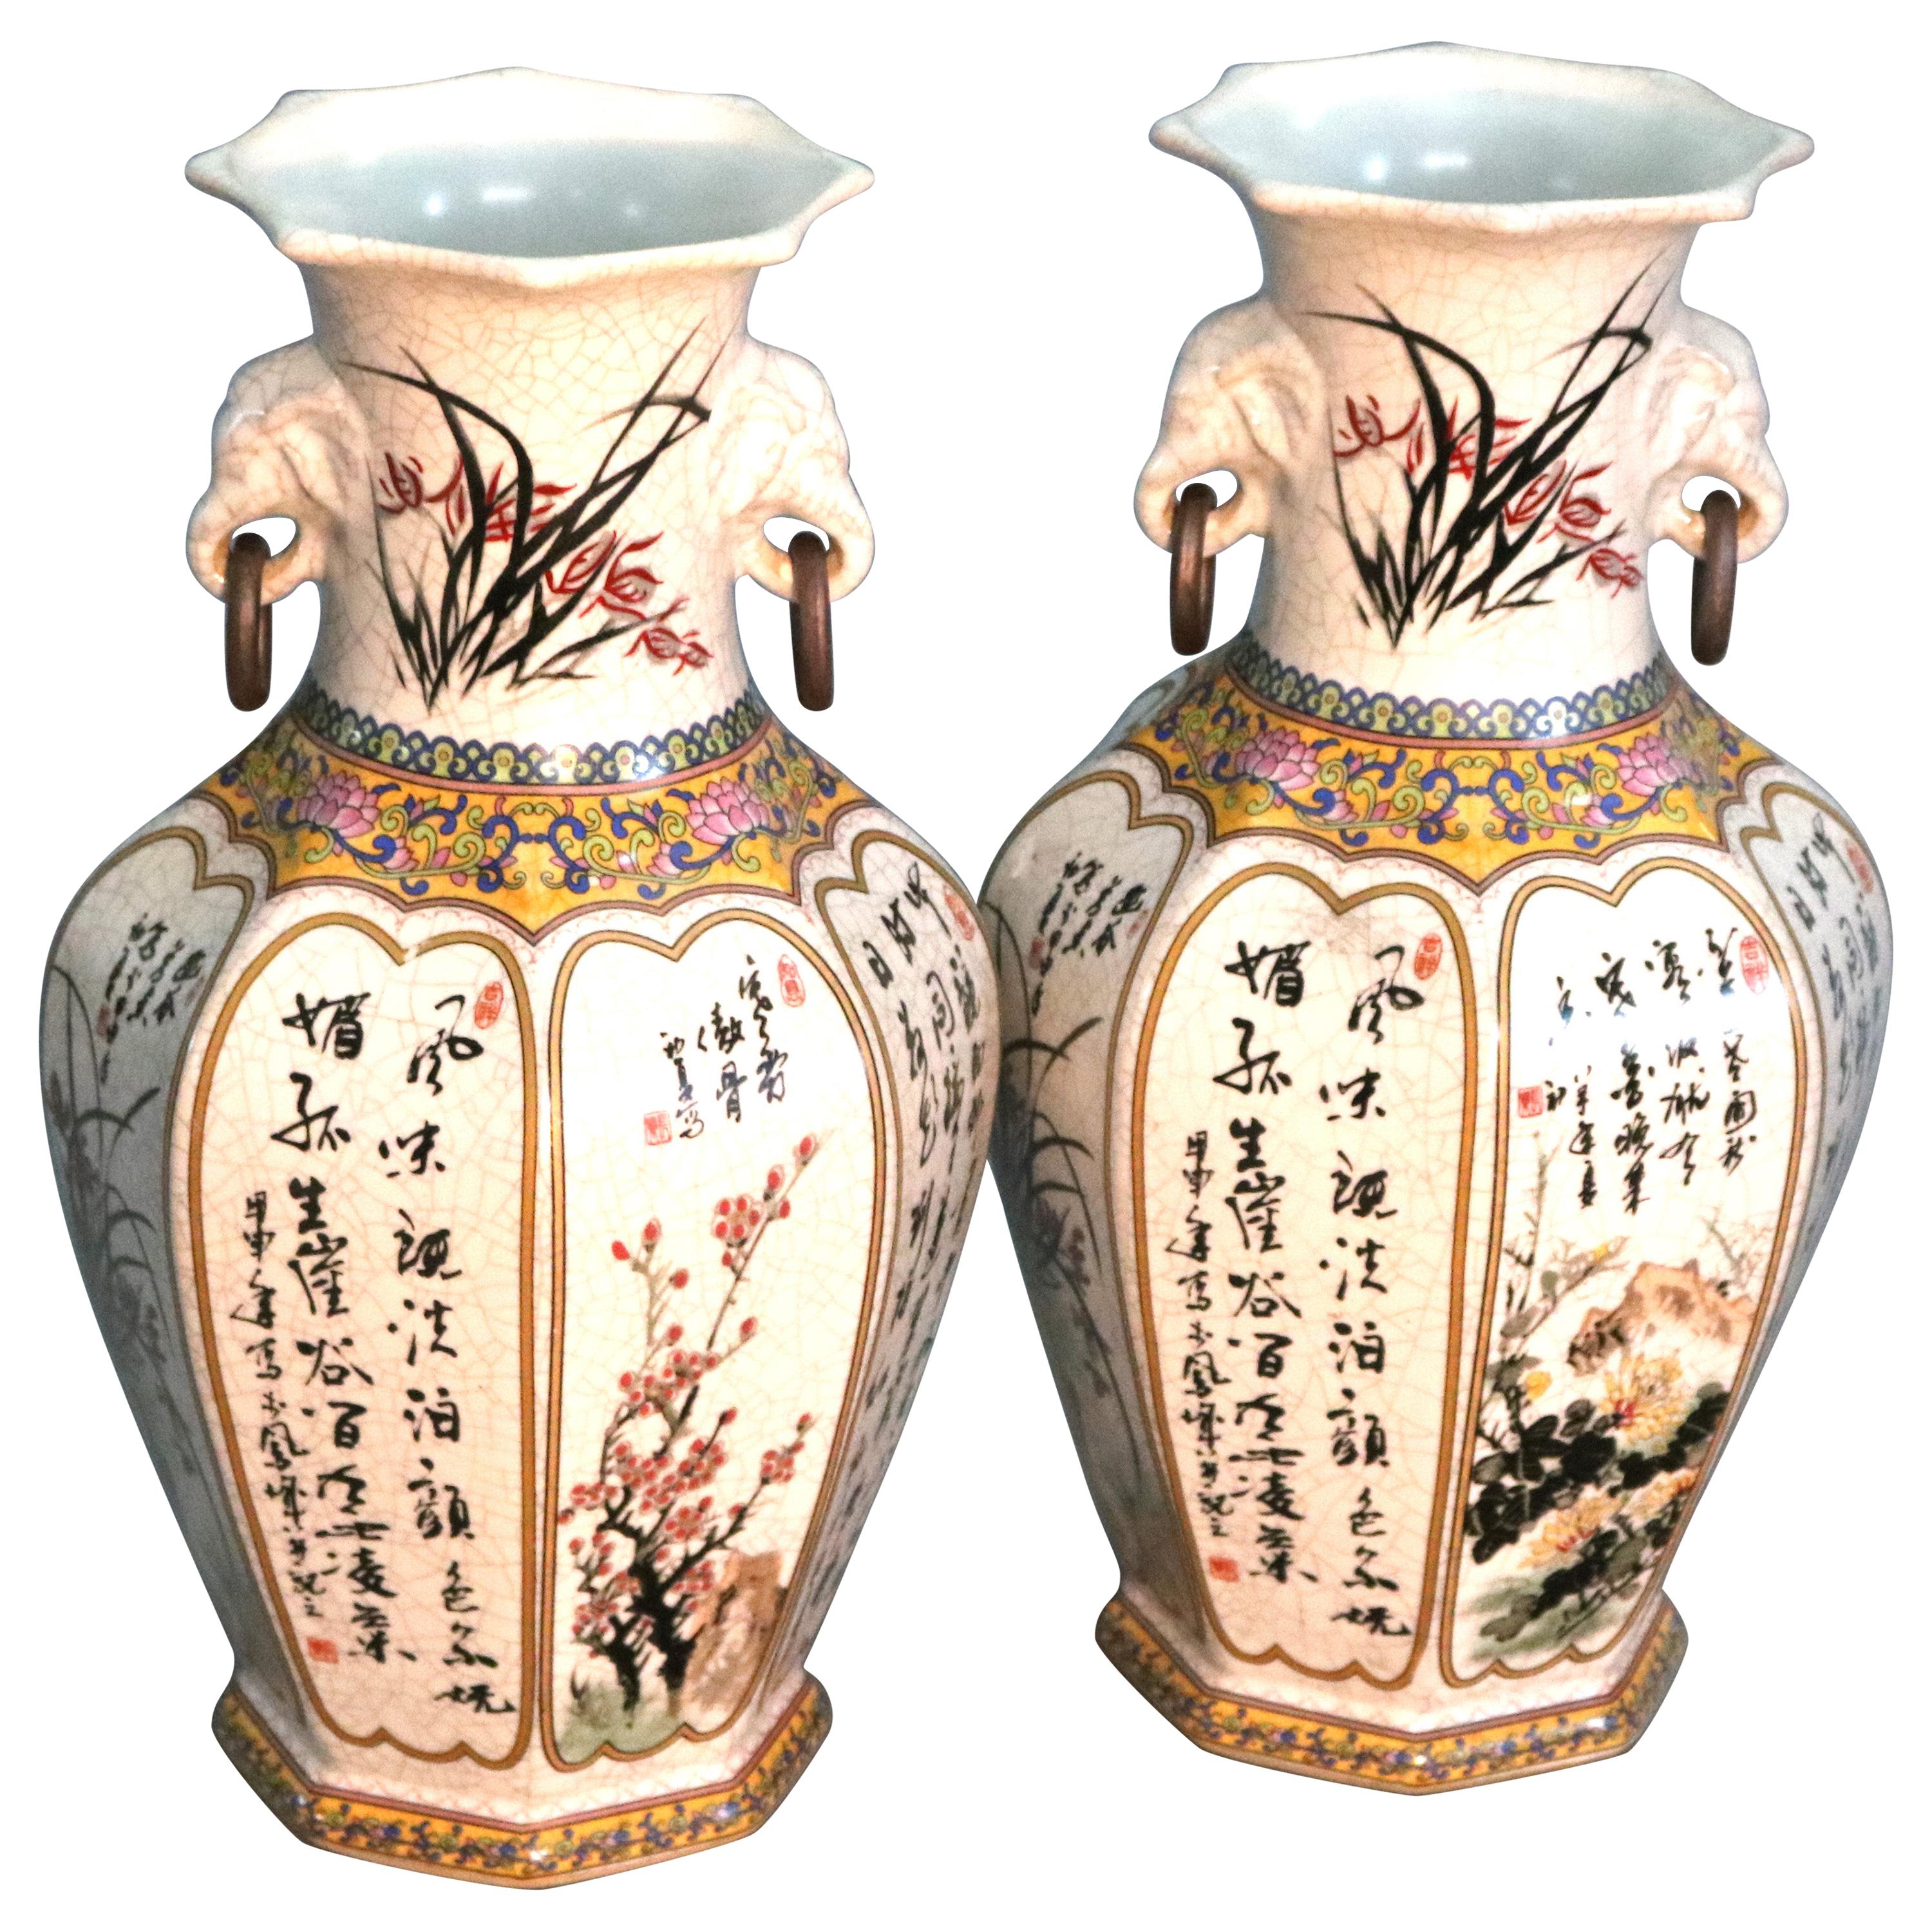 Antique Pair of Chinese Enameled Decorated Porcelain Vases, 20th Century